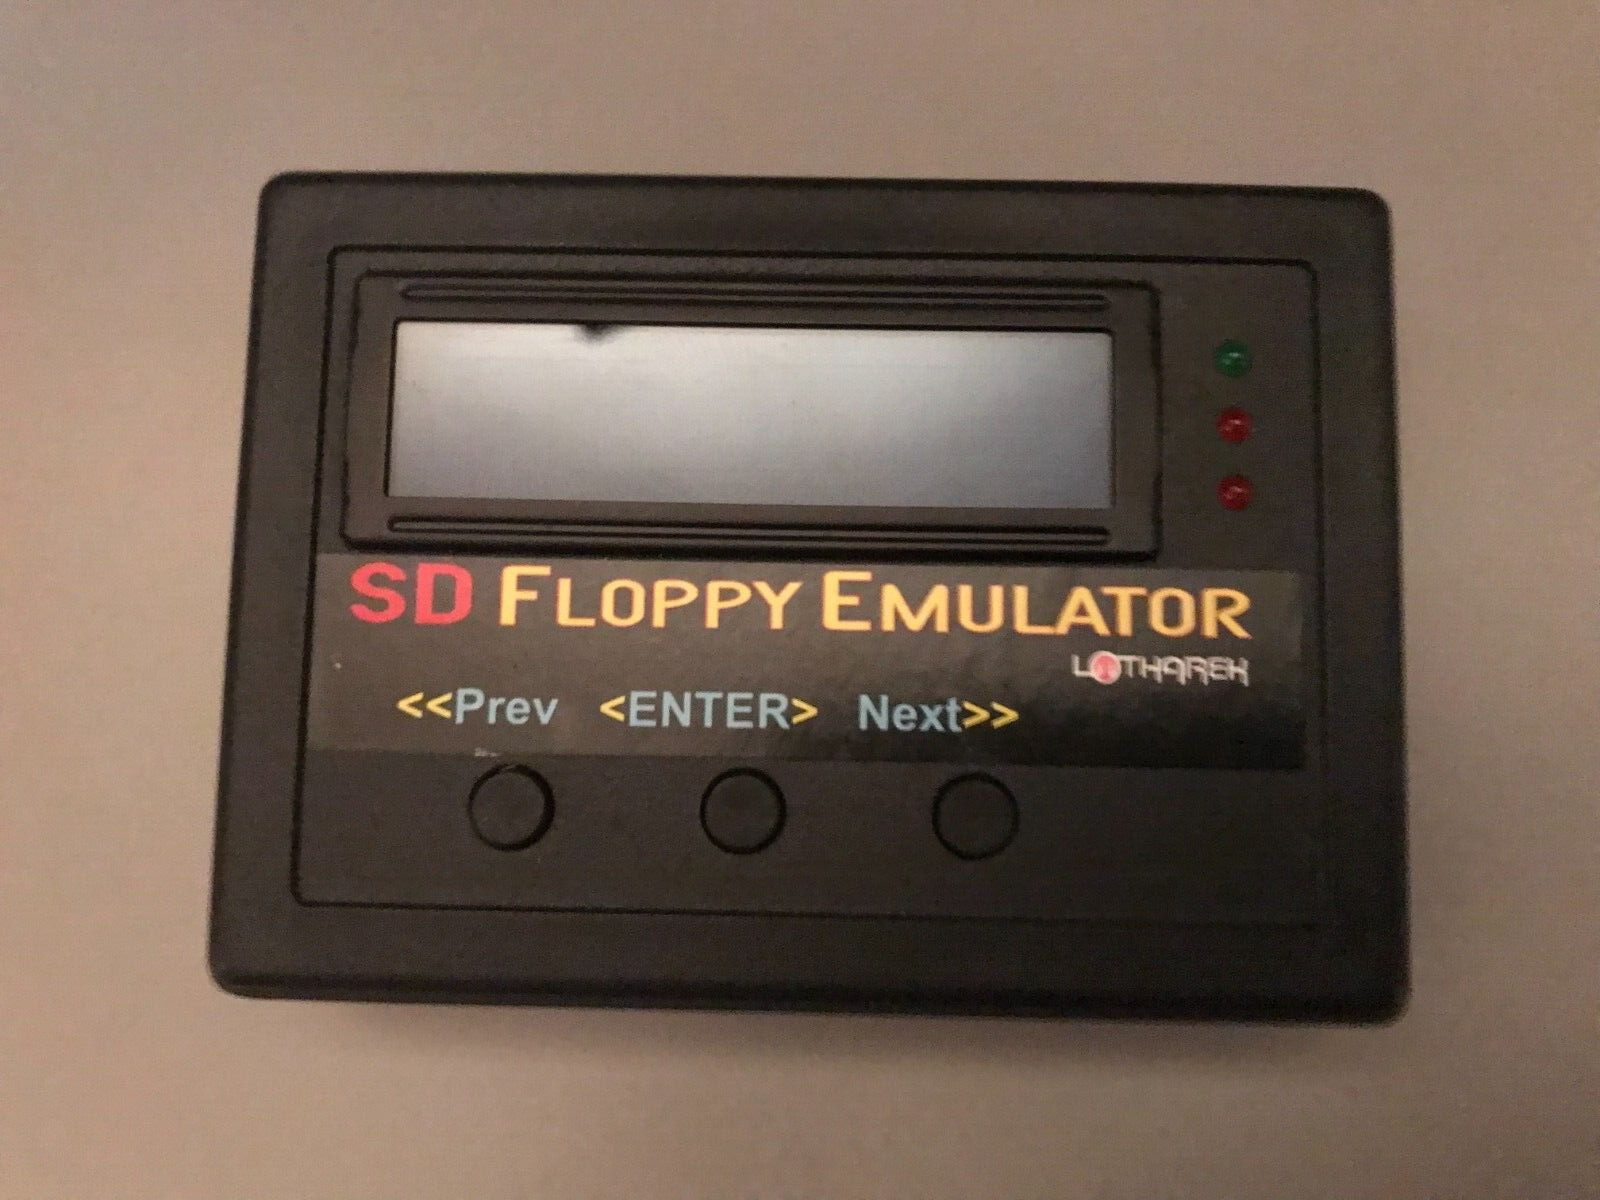 HxC SD Floppy Emulator for booting/using disk images on vintage computers